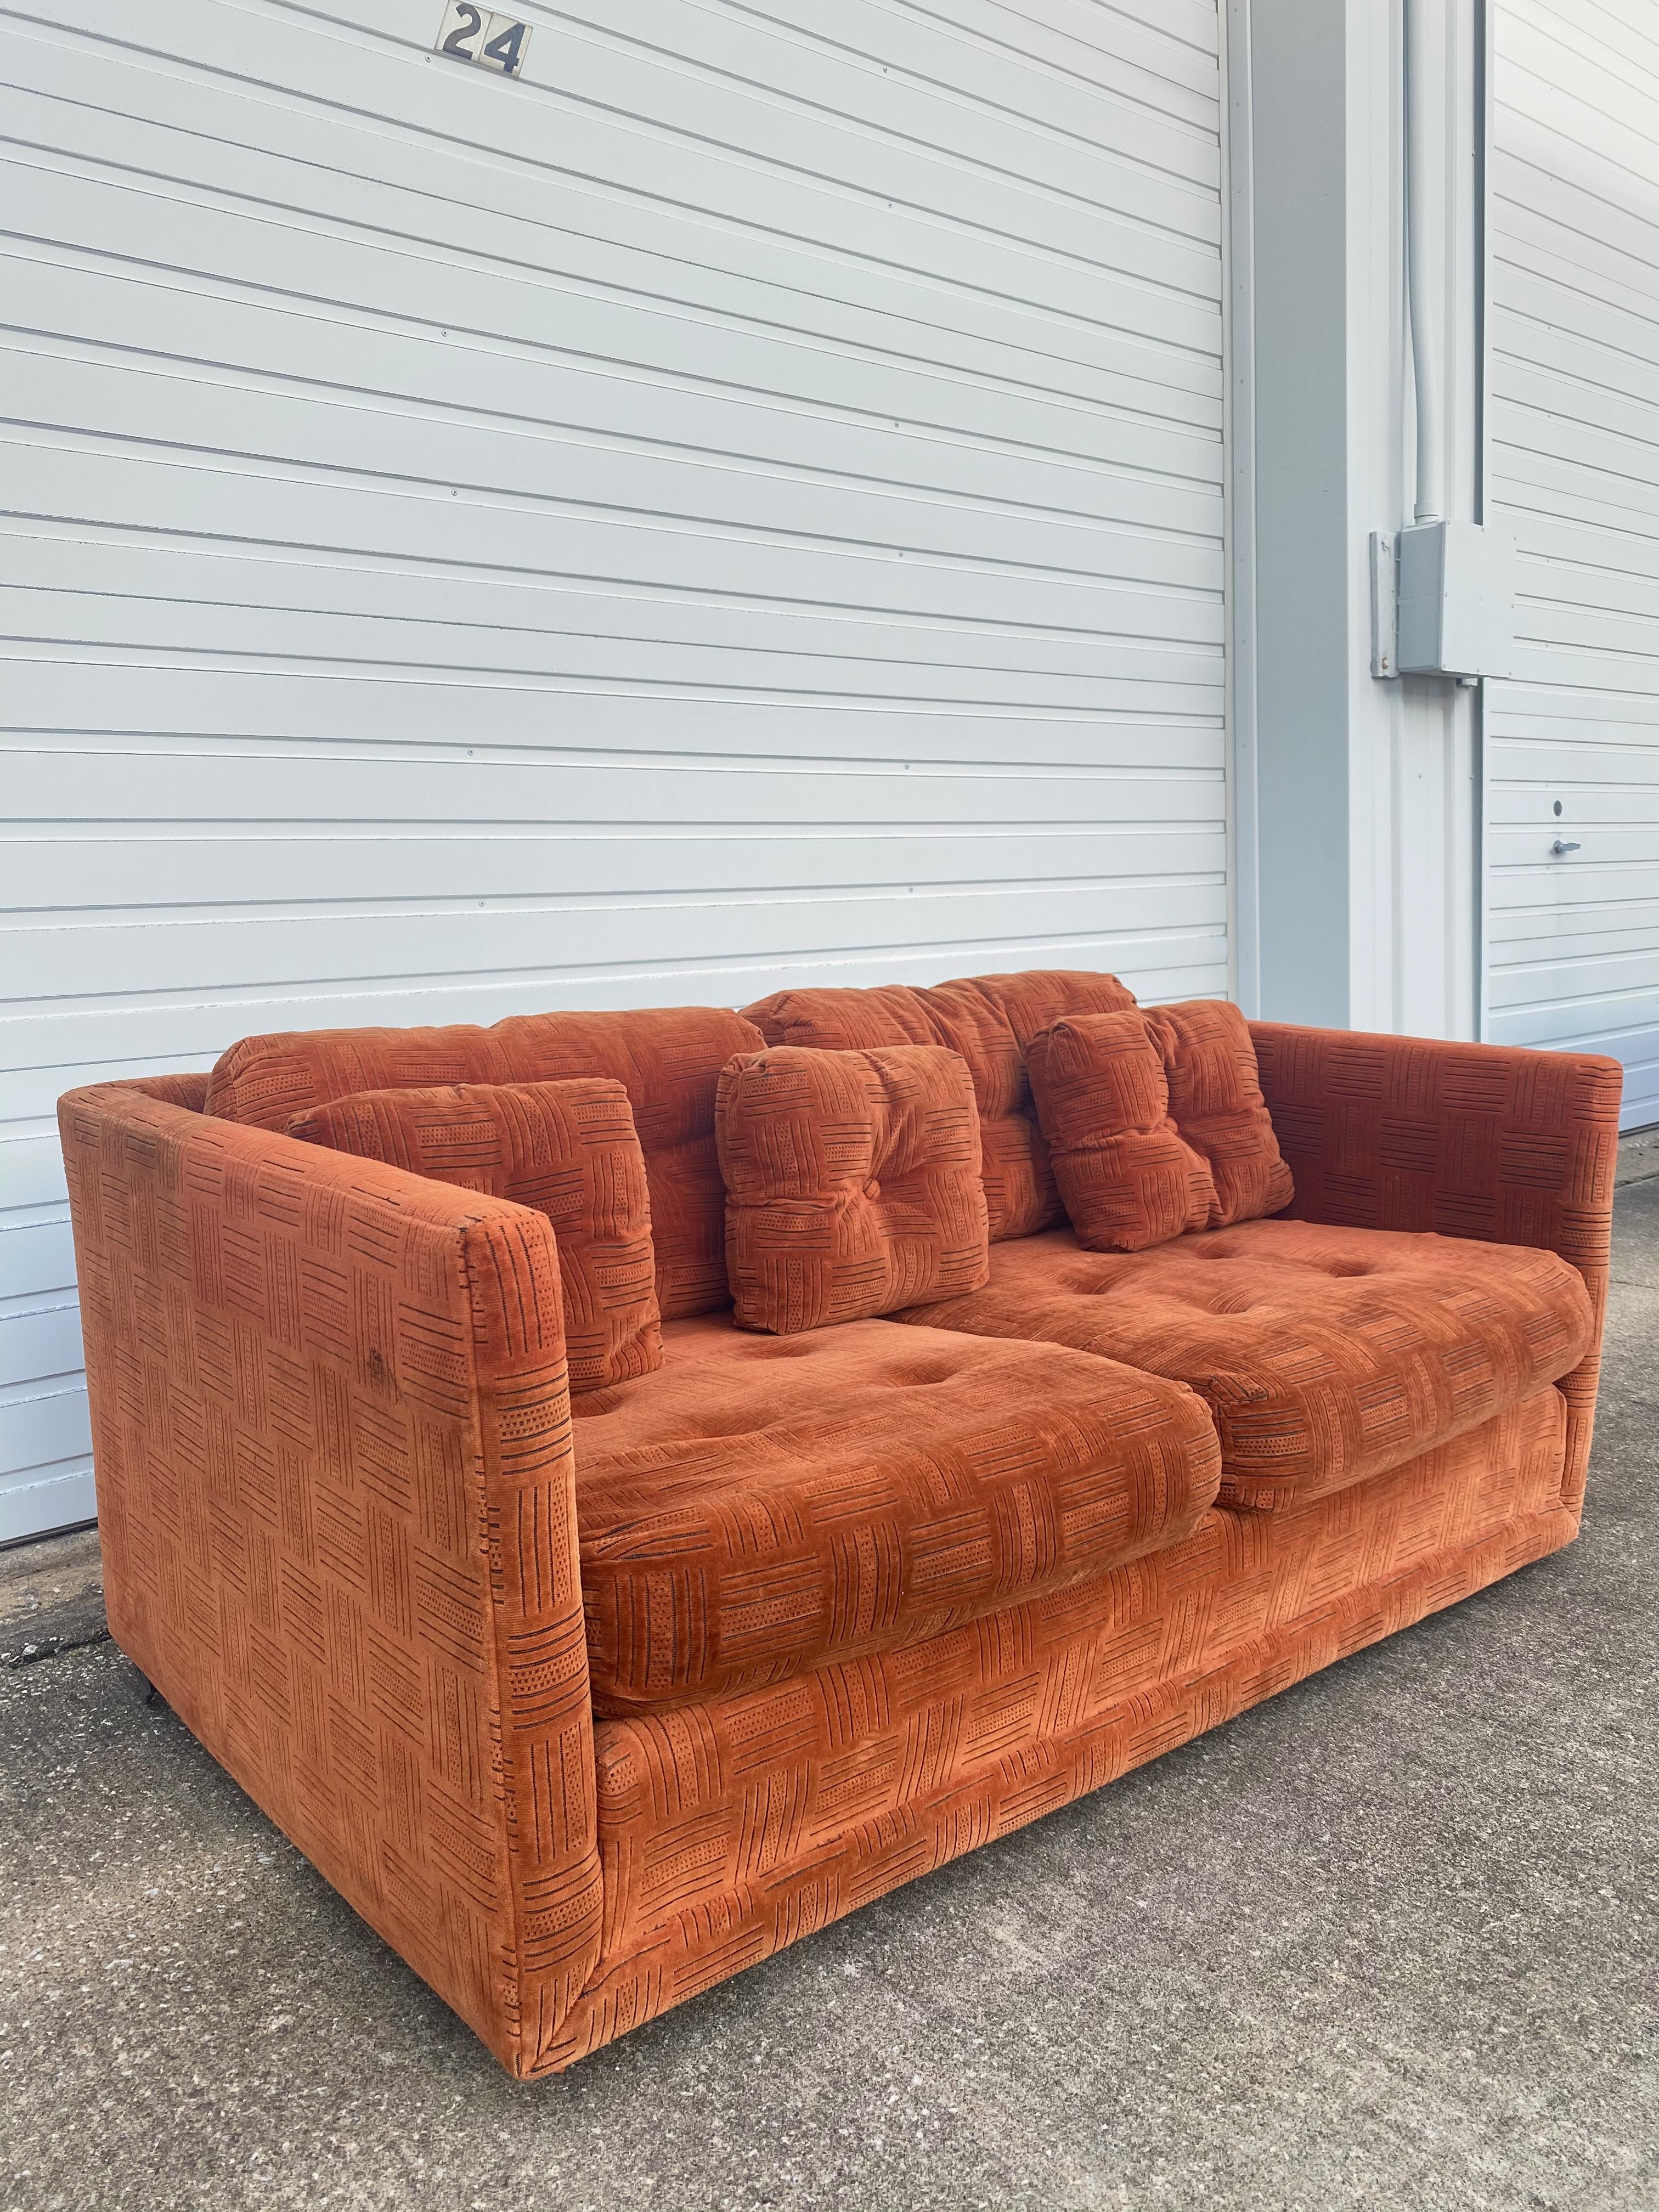 Mid-Century Modern Stratford tuxedo loveseat sofa. Has some amazing bones to become a beautiful sofa with its matching pair (see listings). The velvet fabric does hold some stains and sun fading (it does come with arm covers) due to age, we do